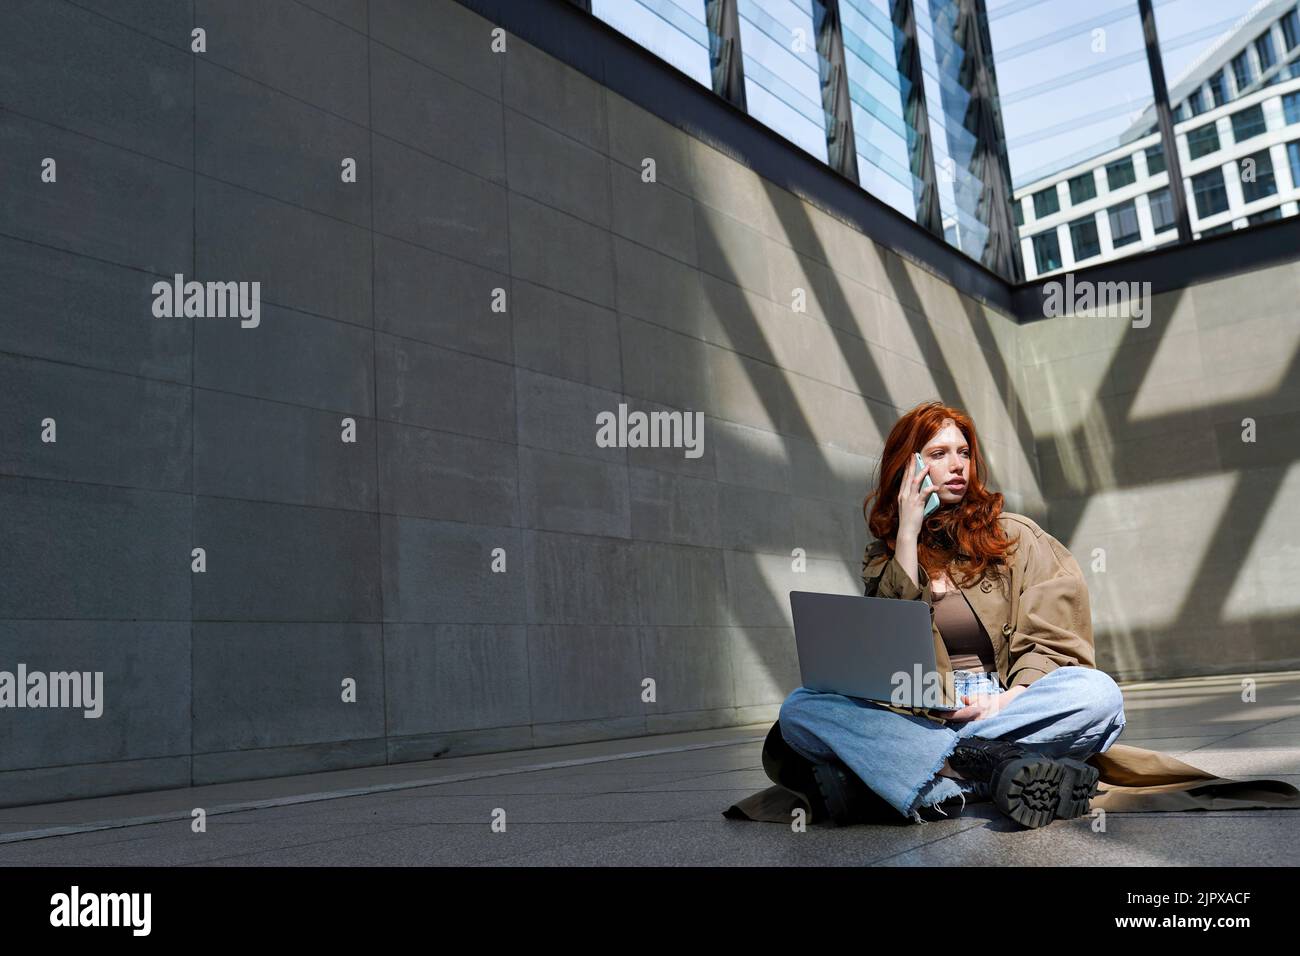 Teen redhead girl using laptop talking on cell in city urban location. Stock Photo